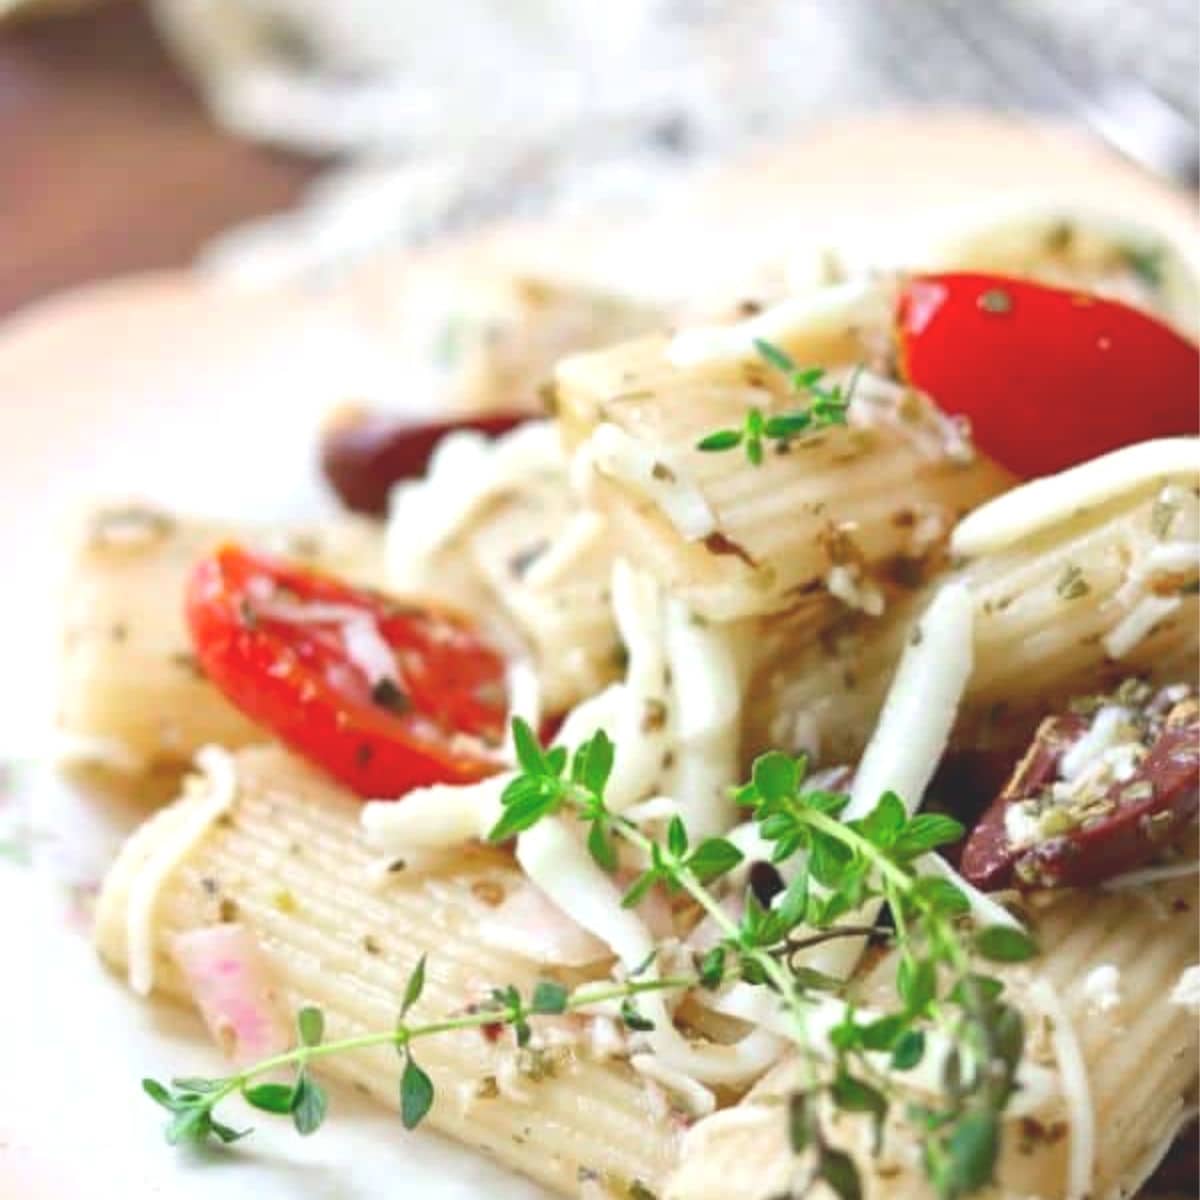 Pasta salad on a plate.